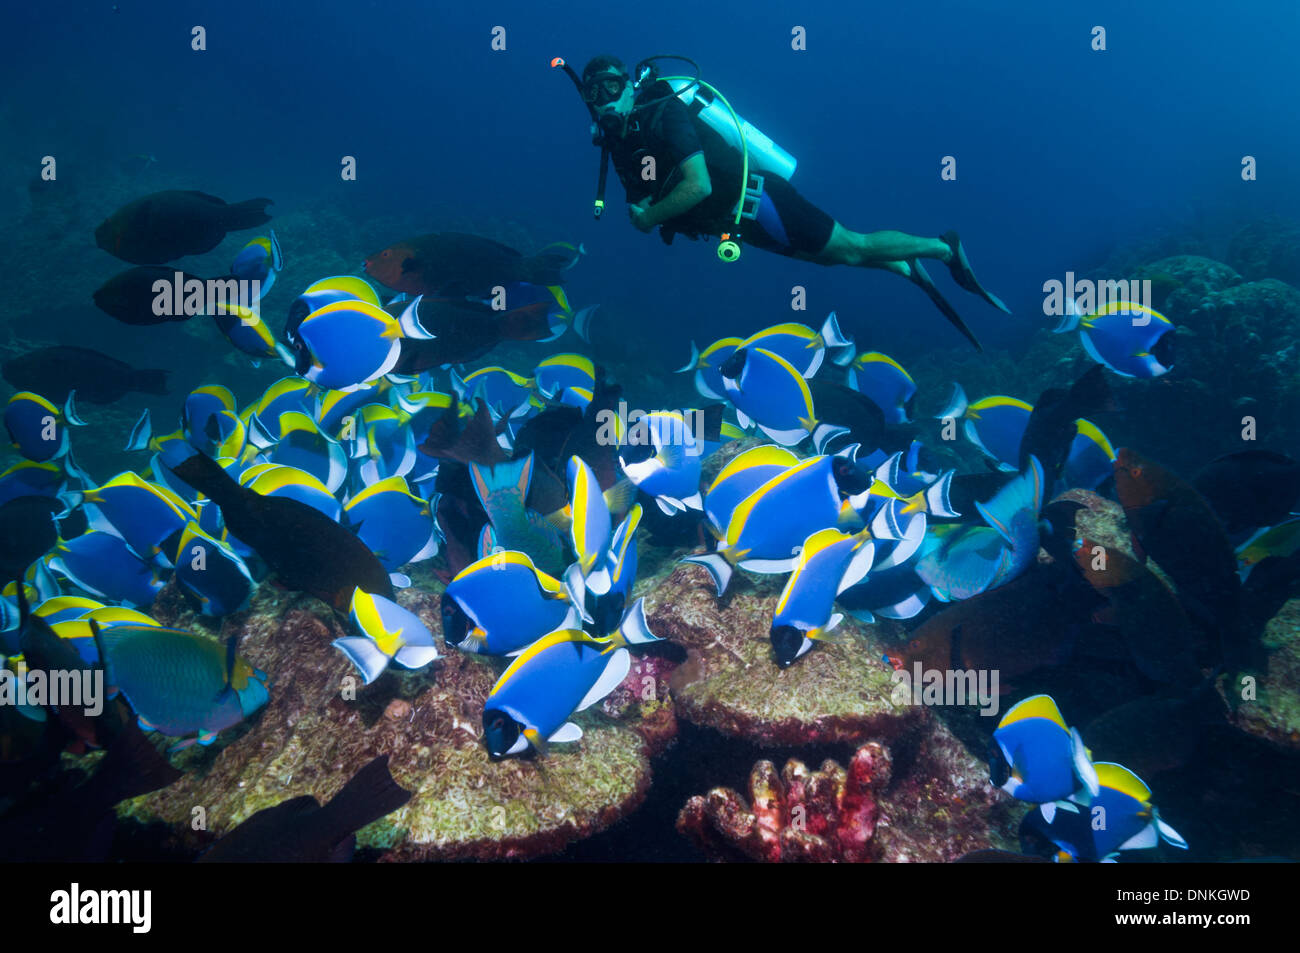 A school of Powder-blue surgeonfish (Acanthurus leucosternon) grazing on coral rock with a male scuba diver in background Stock Photo